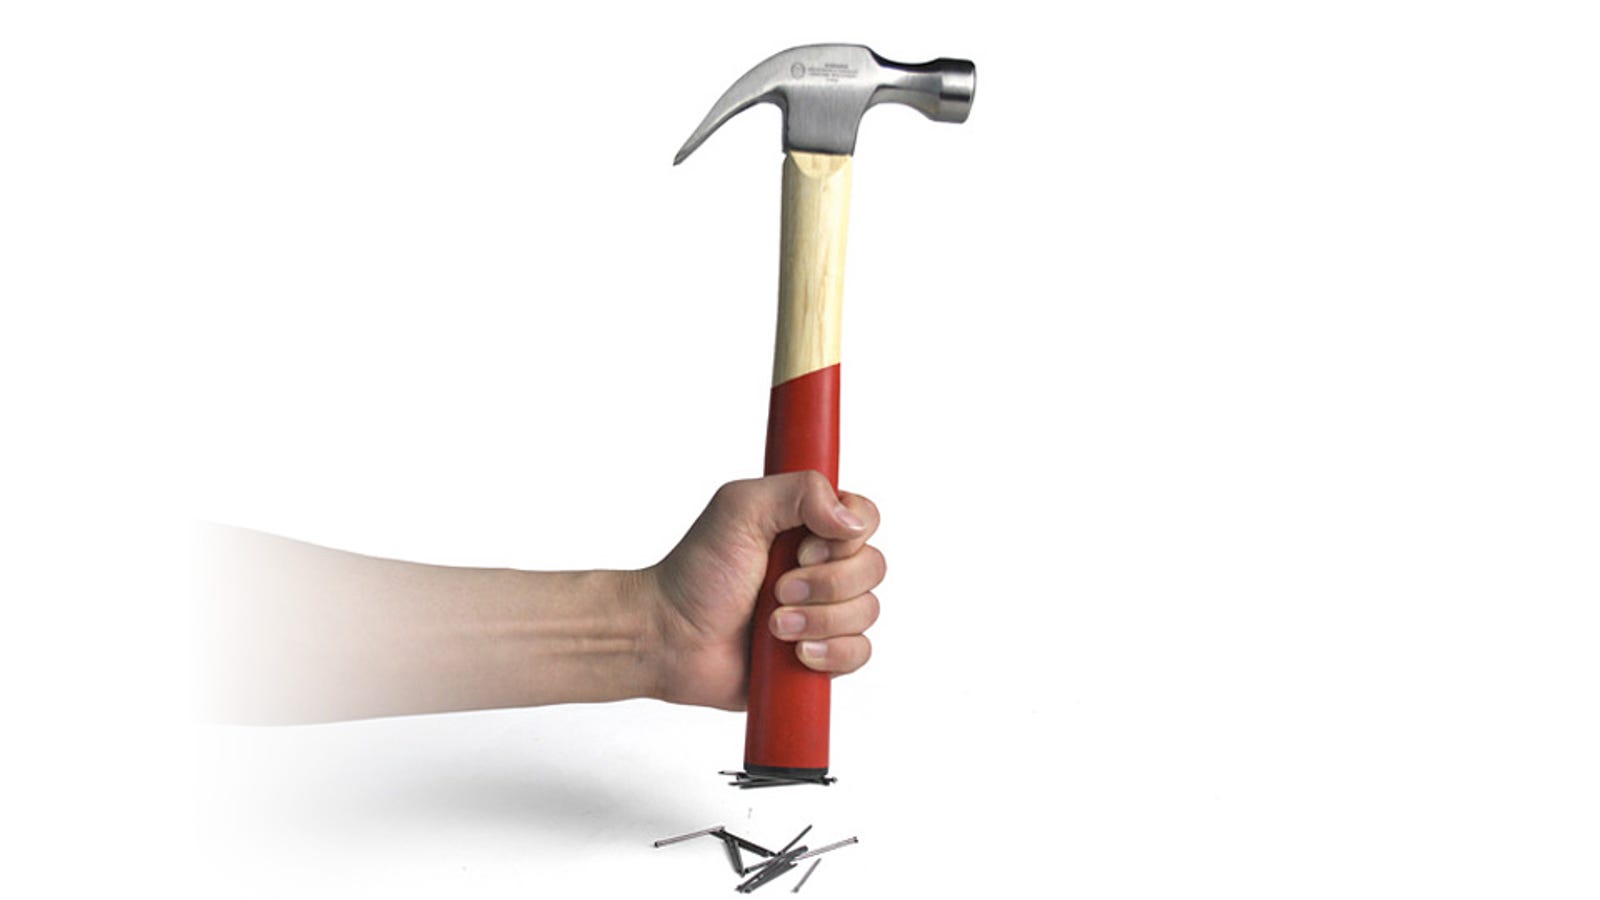 Why Werent Hammers Designed With Magnetic Handles In The First Place 